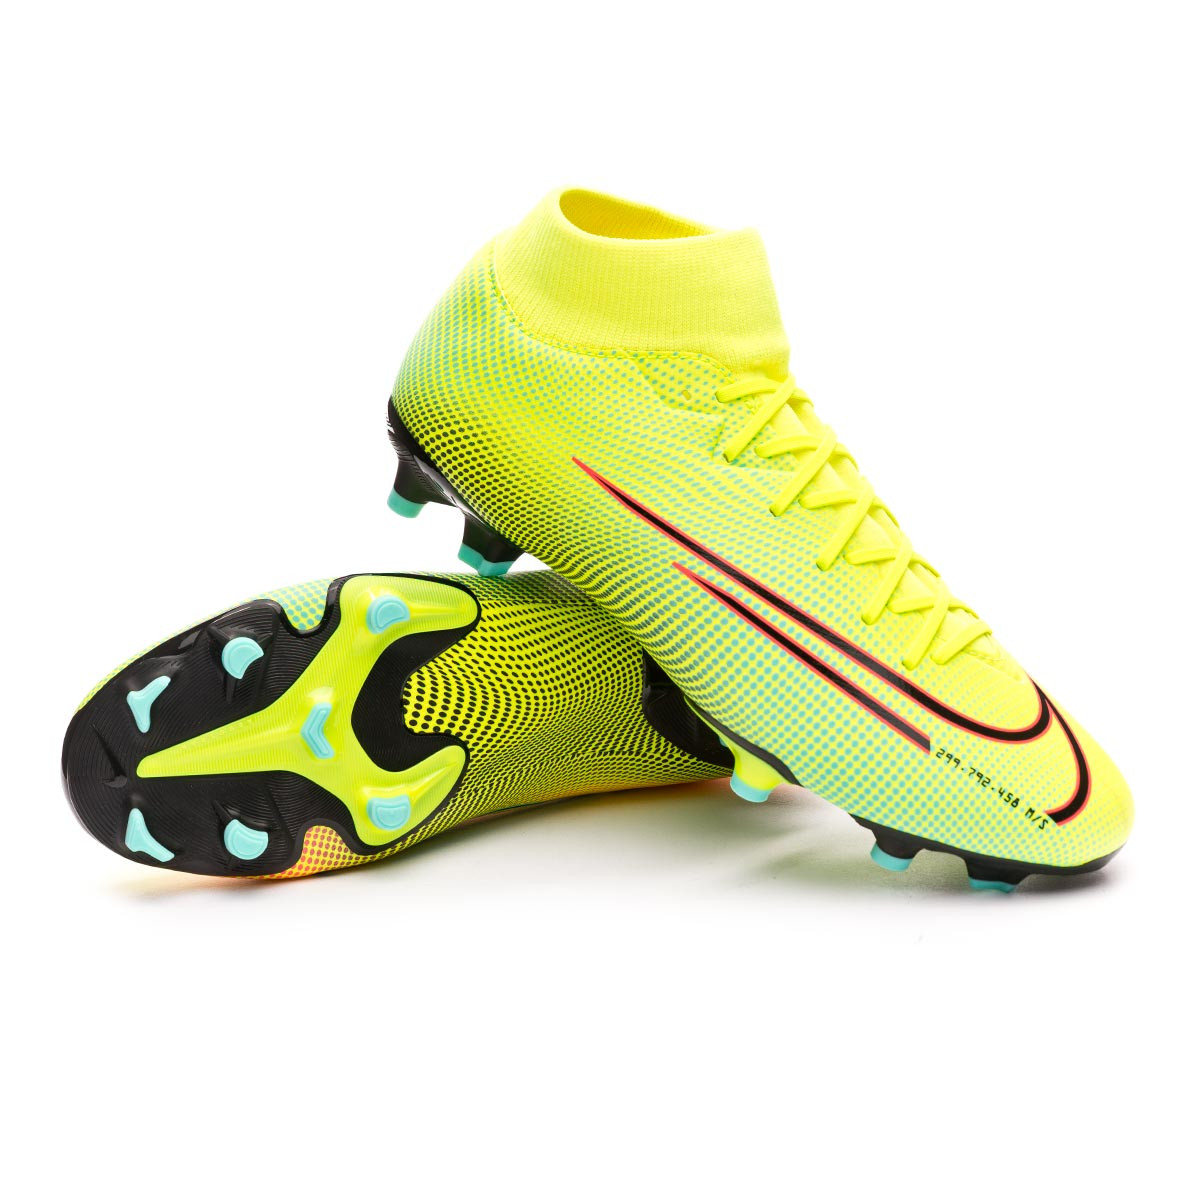 green nike boots